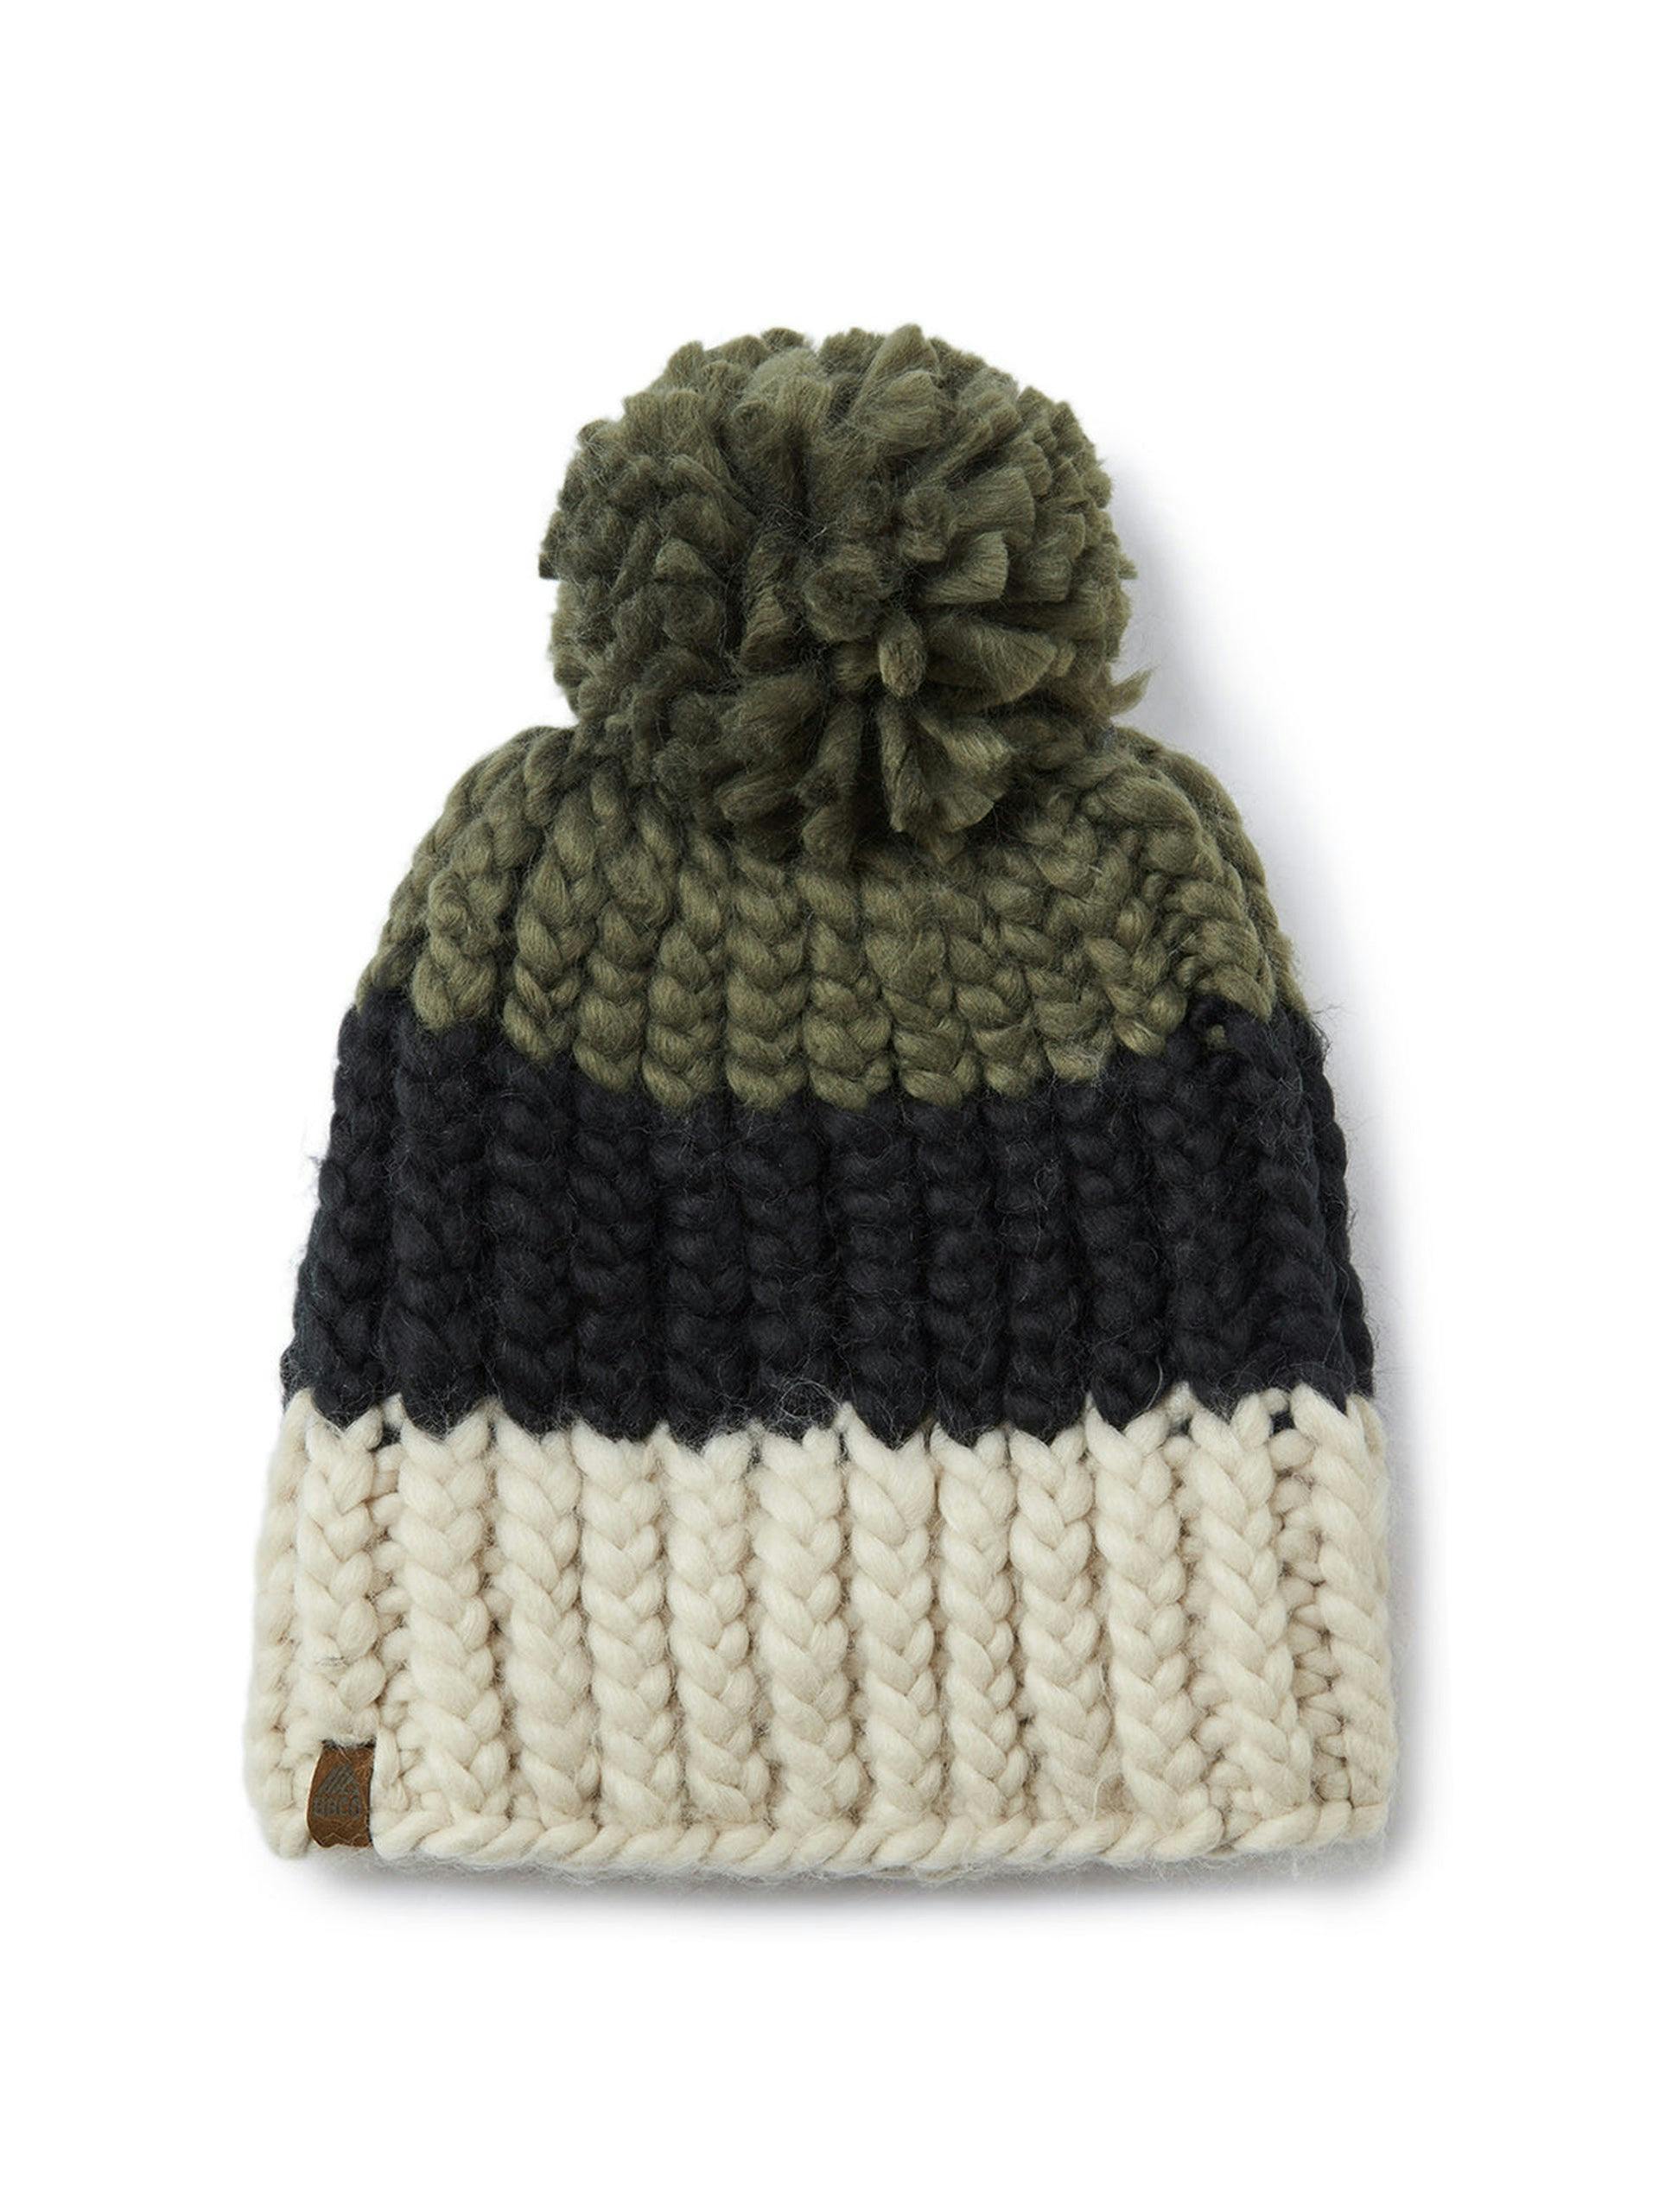 Green, black and white knitted beanie with pom pom